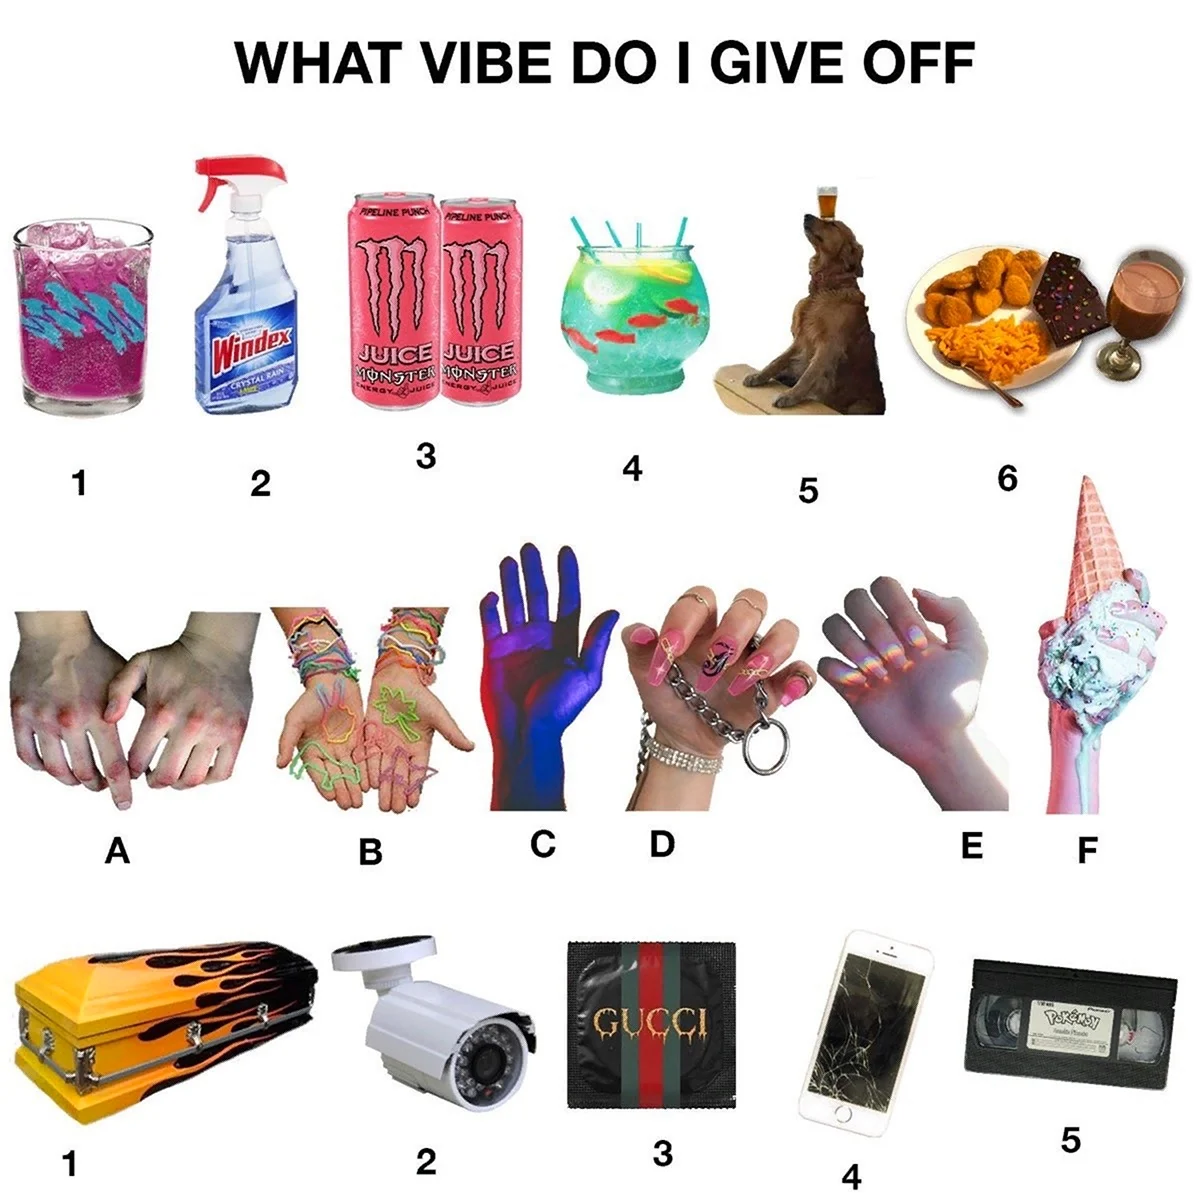 What Vibe do i give off